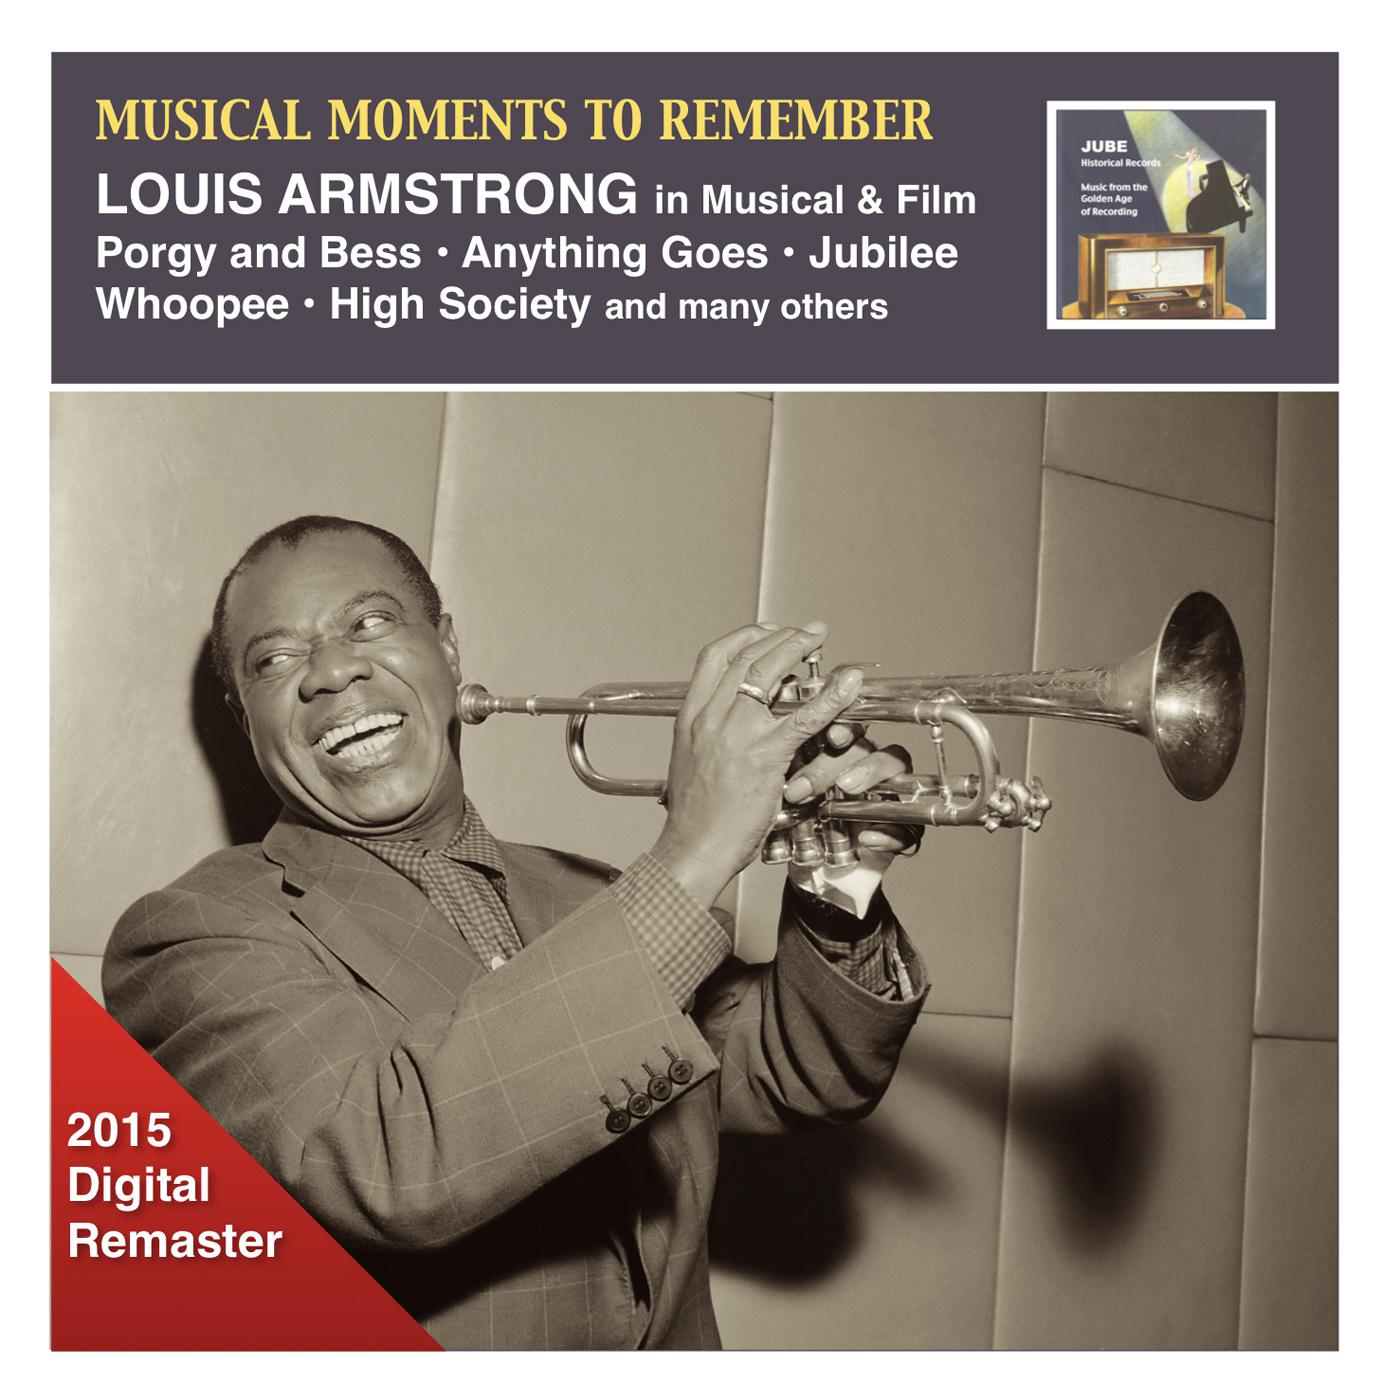 MUSICAL MOMENTS TO REMEMBER - Louis Armstrong in Musical and Film (1929-1957)专辑